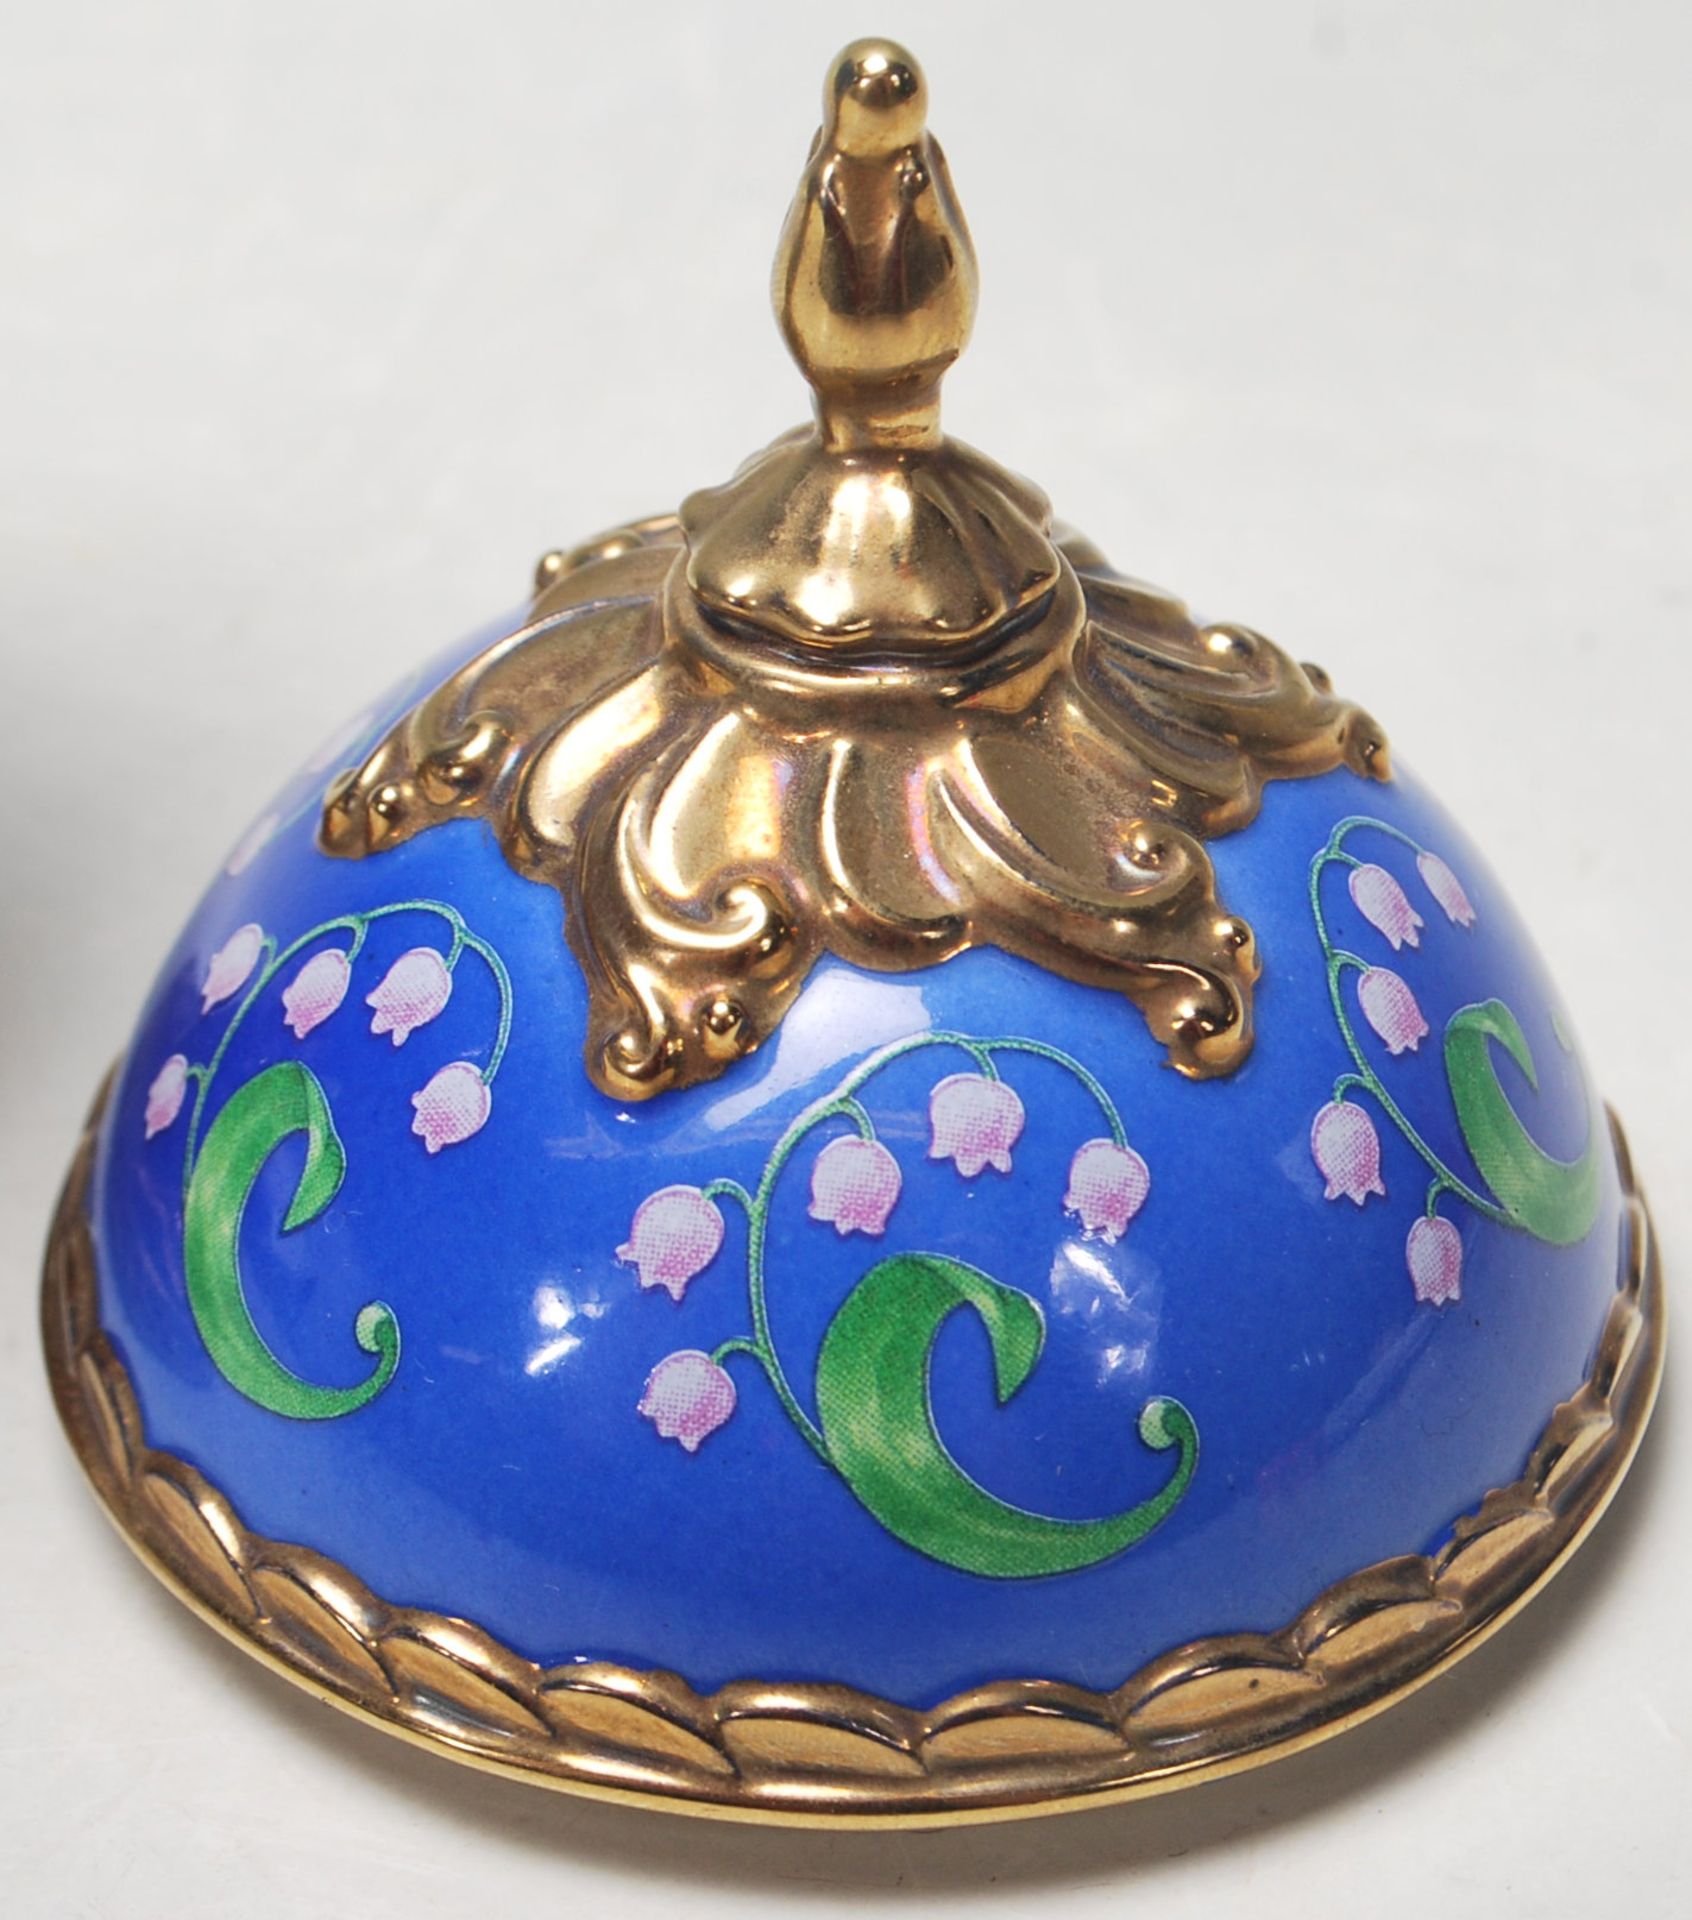 FABERGE EGG - HOUSE OF FABERGE - MUSICAL EGG - LILY OF THE VALLEY - TCHIAKOVSKY’S DANCE OF THE SUGAR - Image 4 of 5